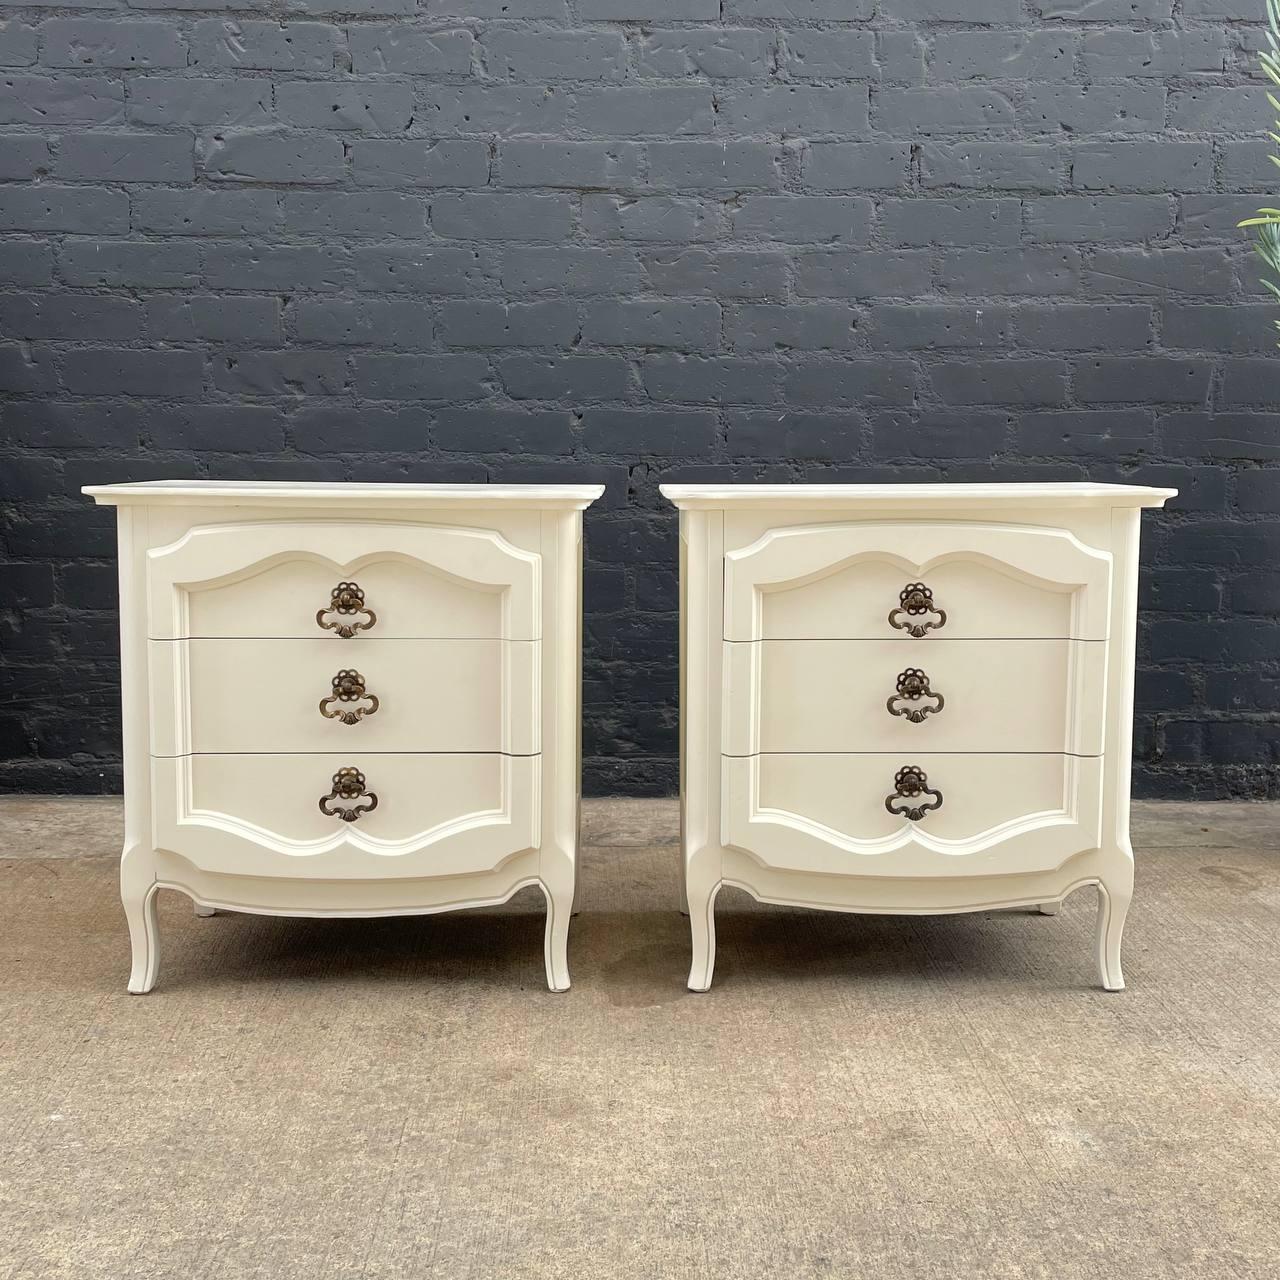 Mid-20th Century Newly Refinished - Pair of French Provincial Style Cream Painted Night Stands For Sale